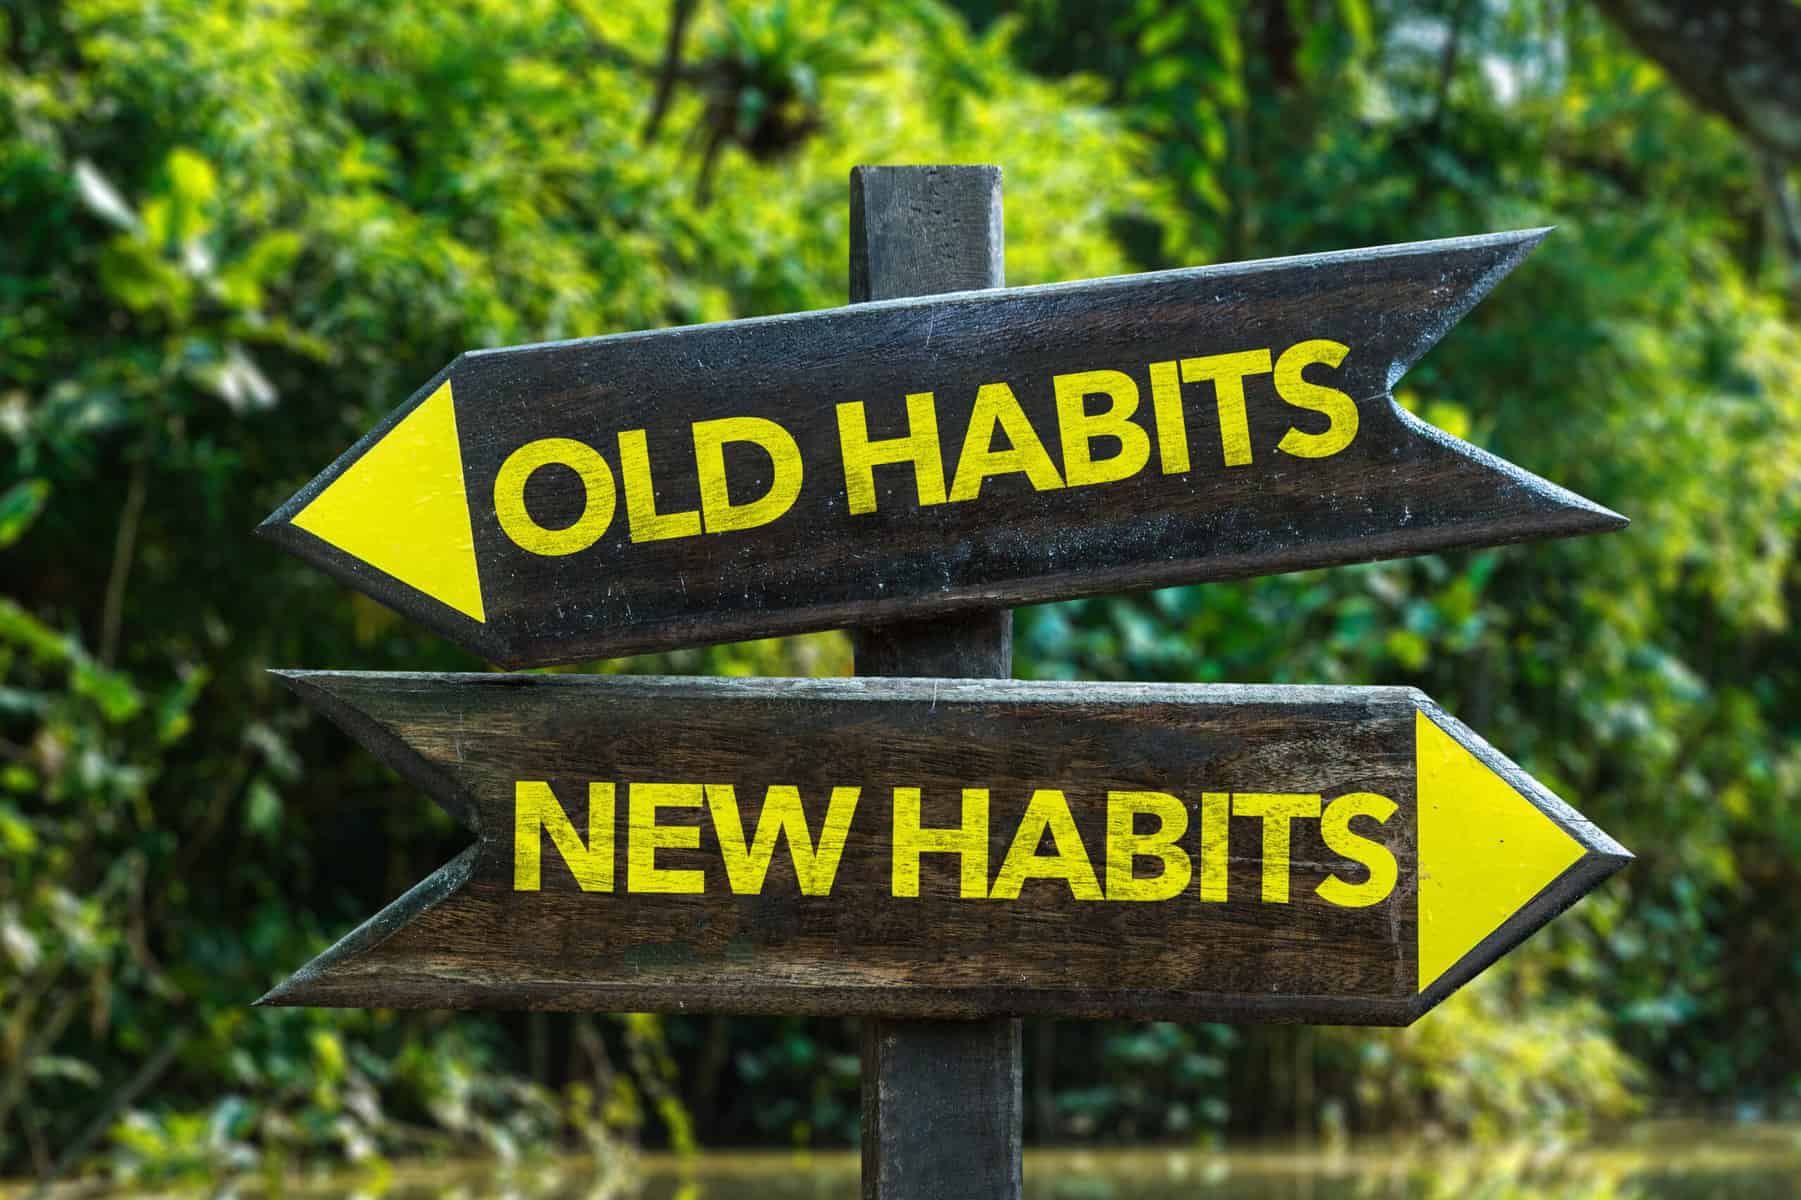 How to stop a habit to become your best self